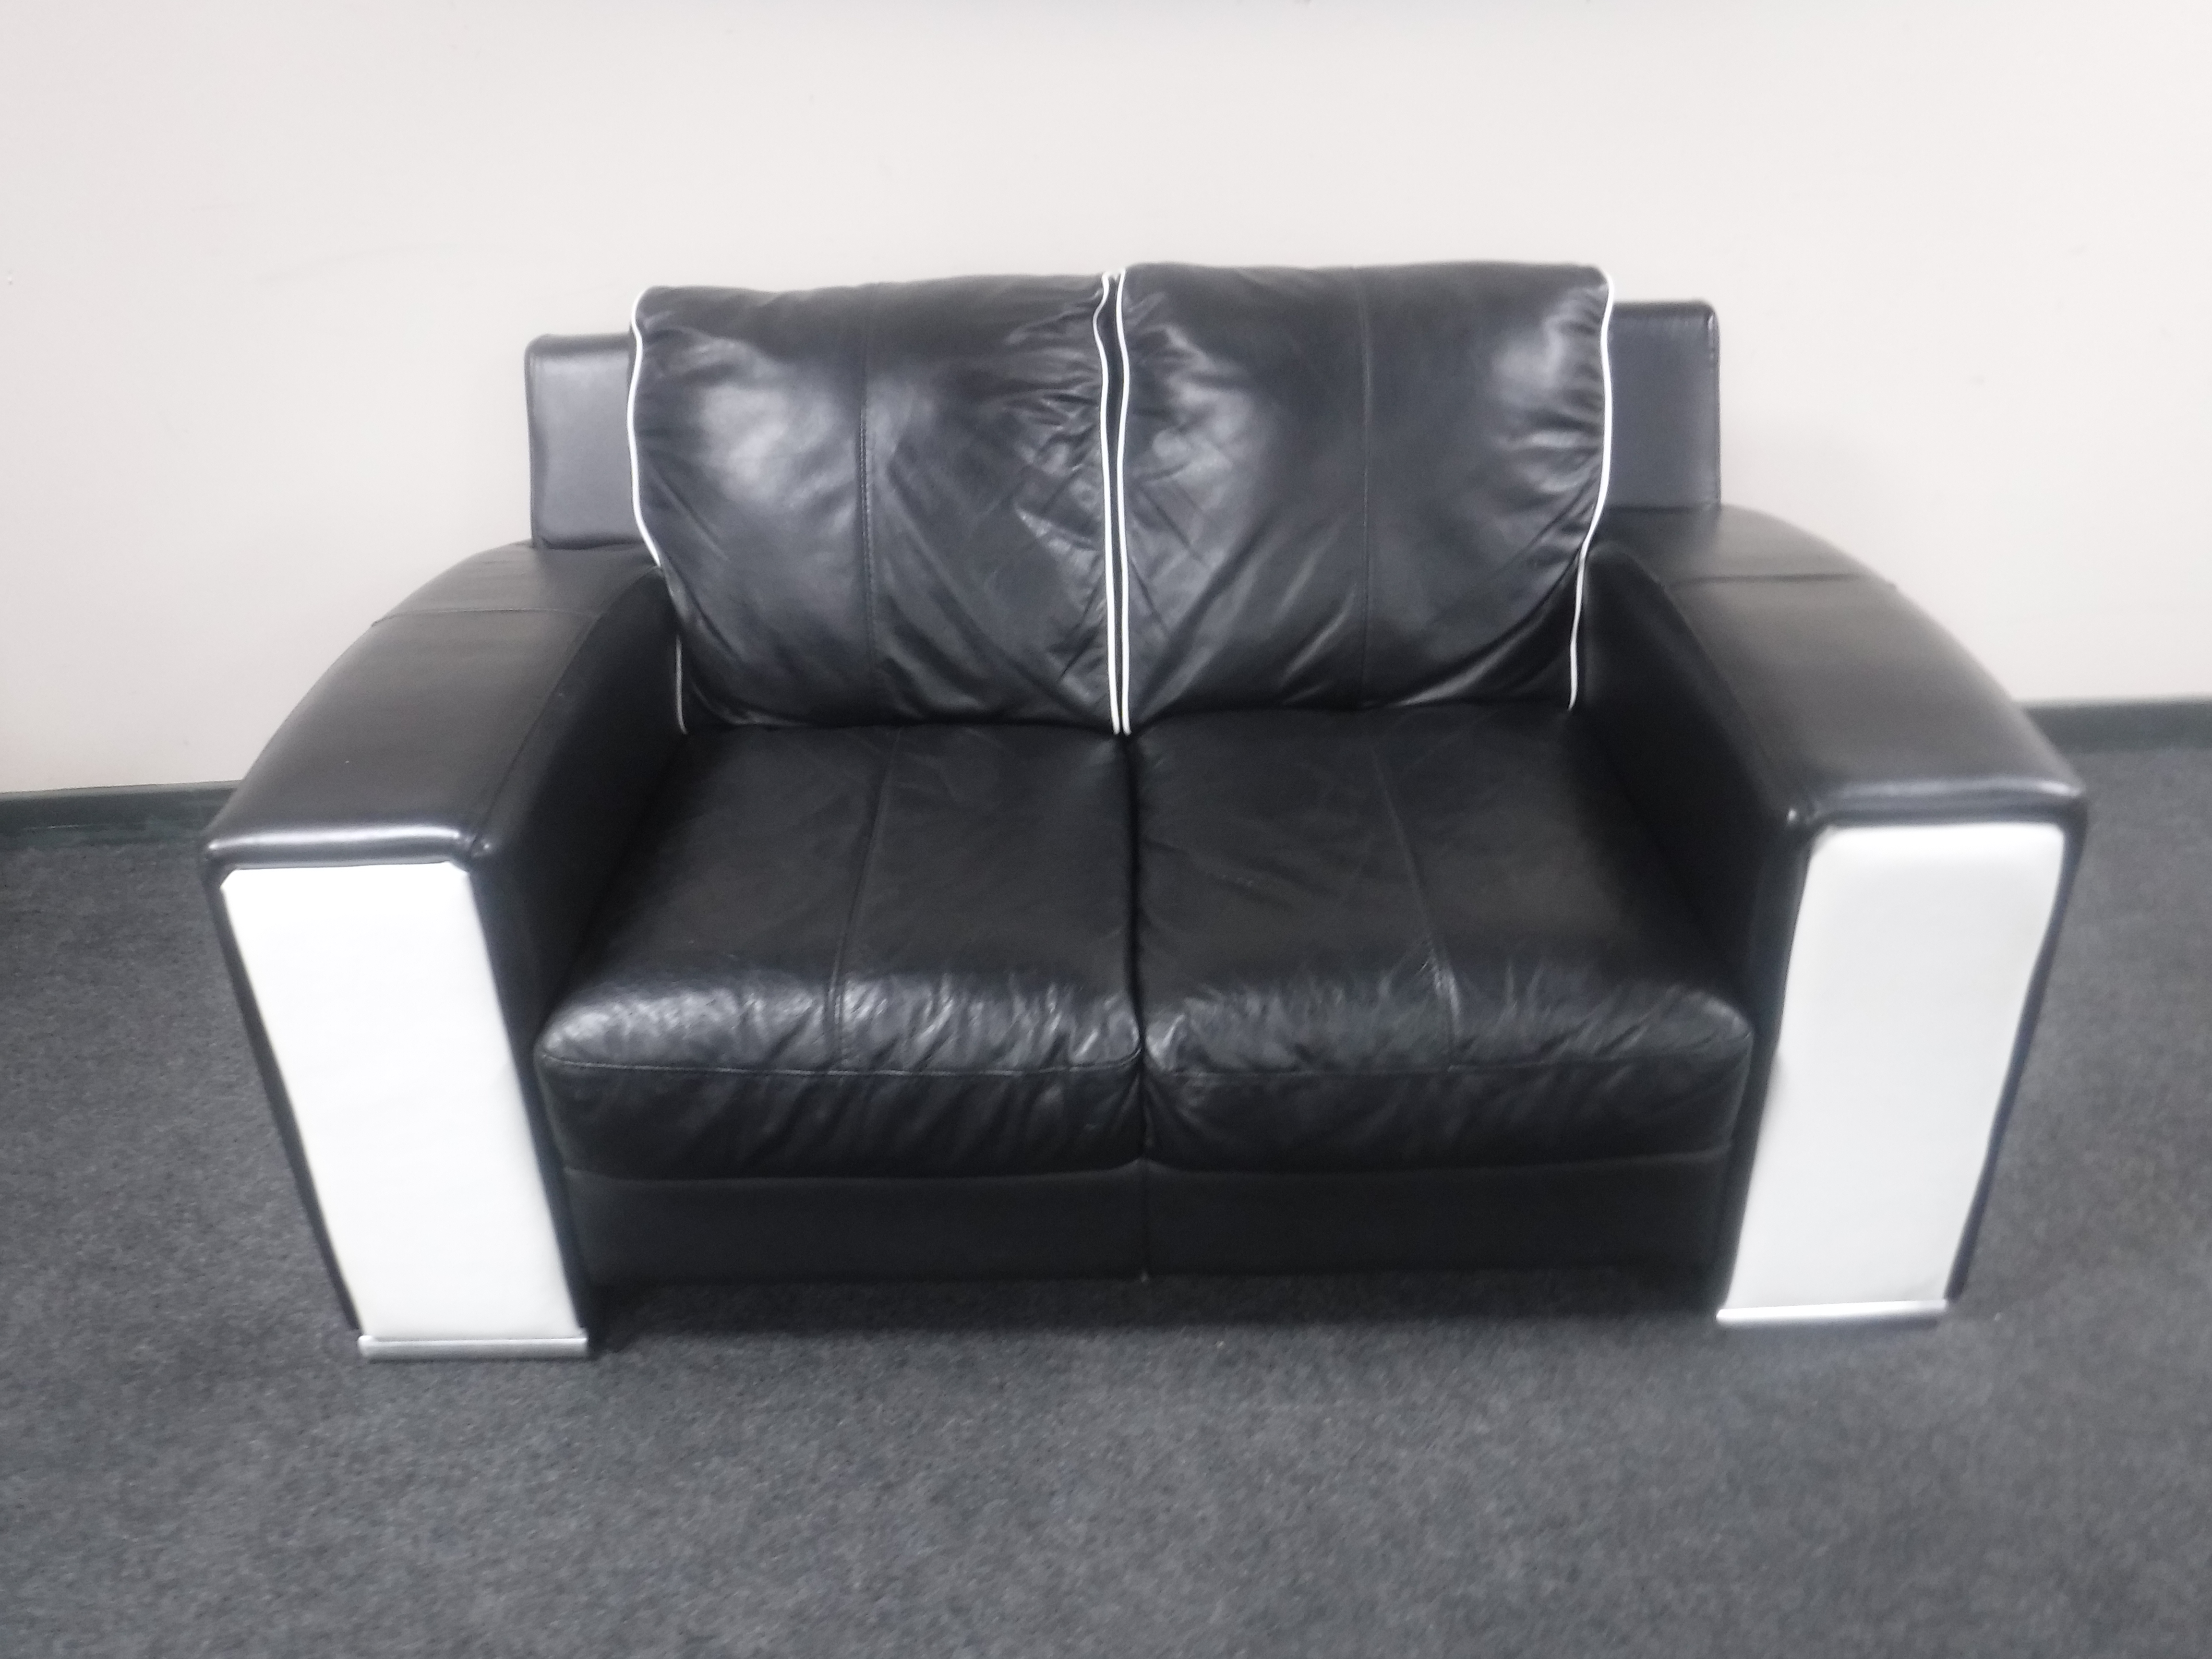 A three seater settee with matching two seater settee upholstered in a two-tone black and white - Image 2 of 2